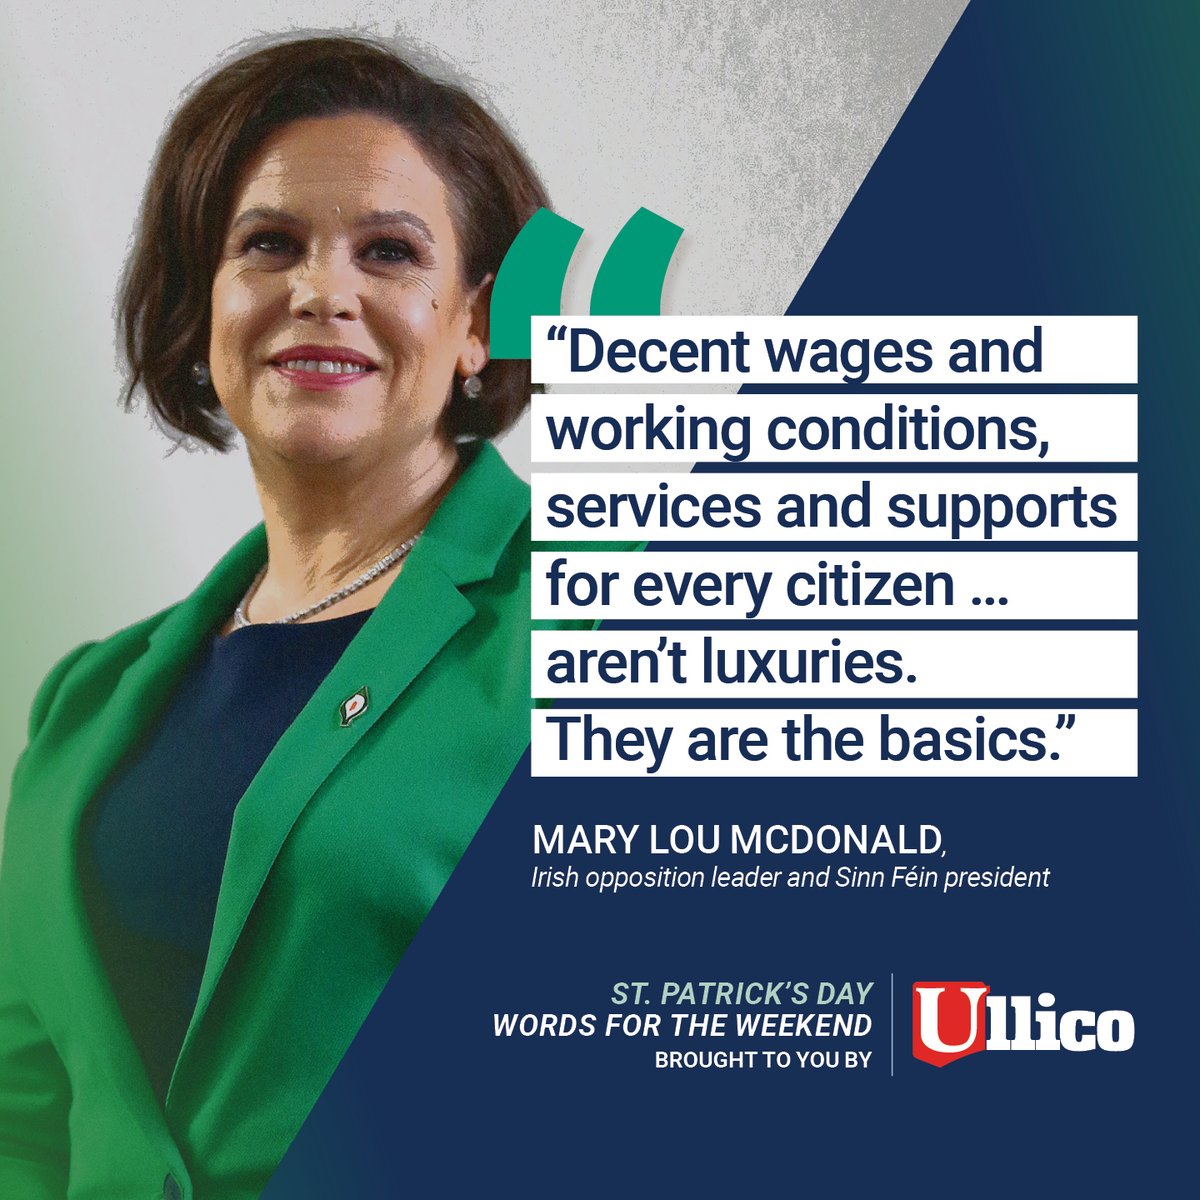 It's Words for the Weekend, brought to you by the #union movement's company. #UnionStrong #StPatricksDay @MaryLouMcDonald